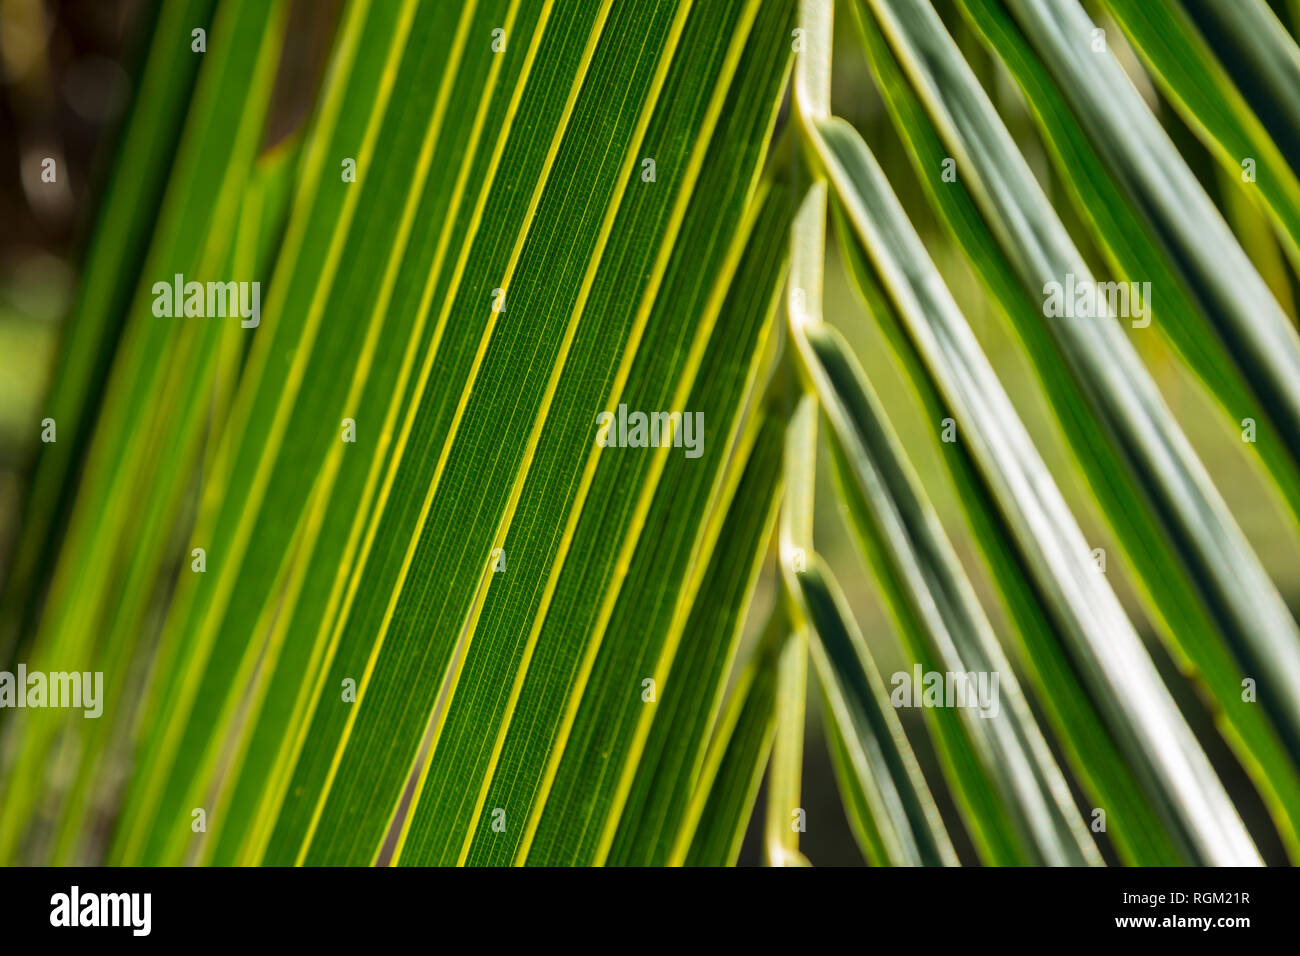 Palm leaf forming a natural pattern Stock Photo